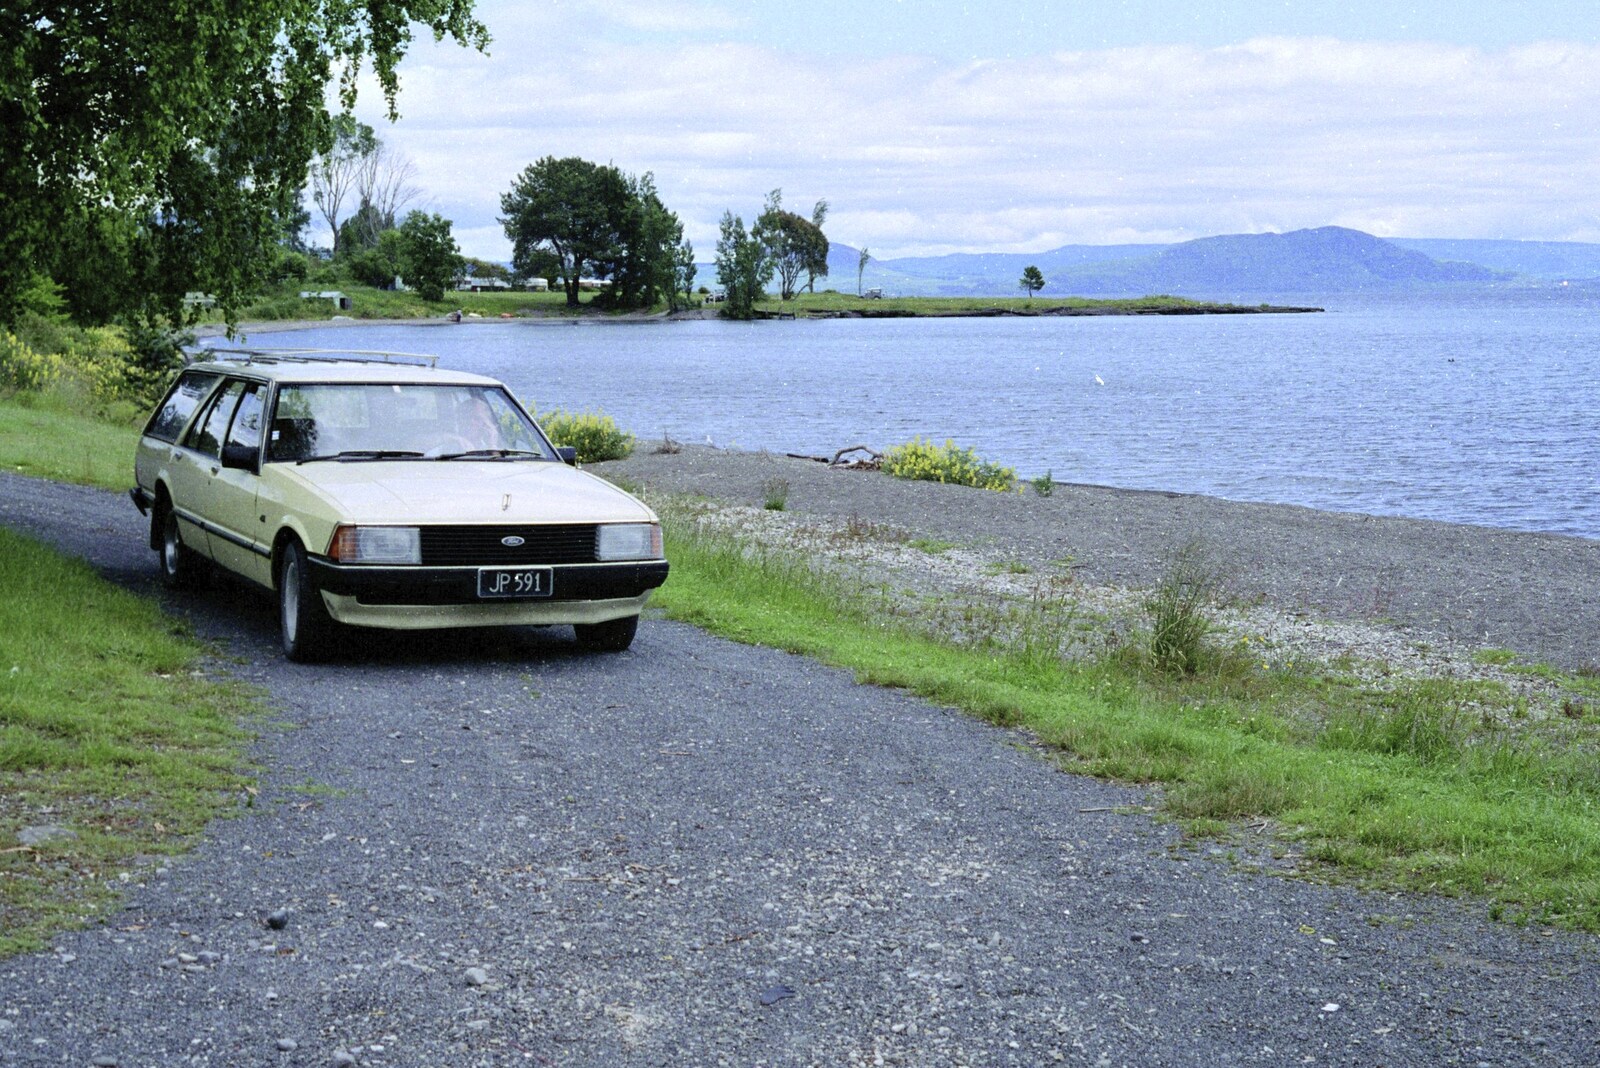 The 3.7 litre Ford Falcon by the lake from A Road-trip Through Rotorua to Palmerston, North Island, New Zealand - 27th November 1992